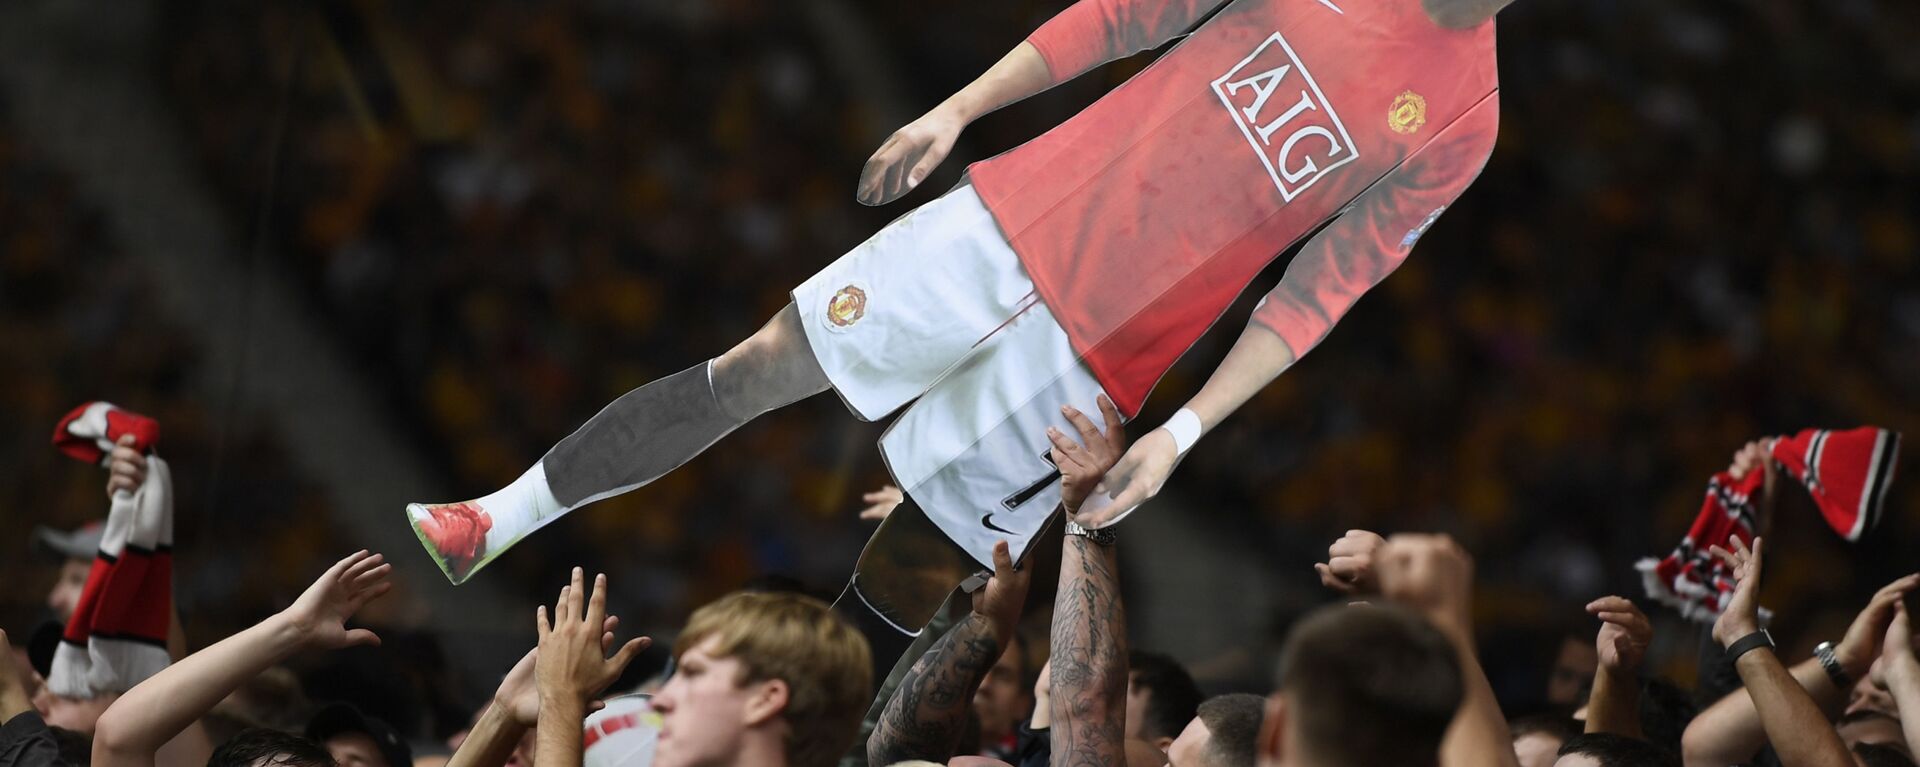 Soccer Football - Premier League - Wolverhampton Wanderers v Manchester United - Molineux Stadium, Wolverhampton, Britain - 29 August 2021 General view of Manchester United fans holding up a cardboard cut out of Cristiano Ronaldo - Sputnik International, 1920, 06.09.2021